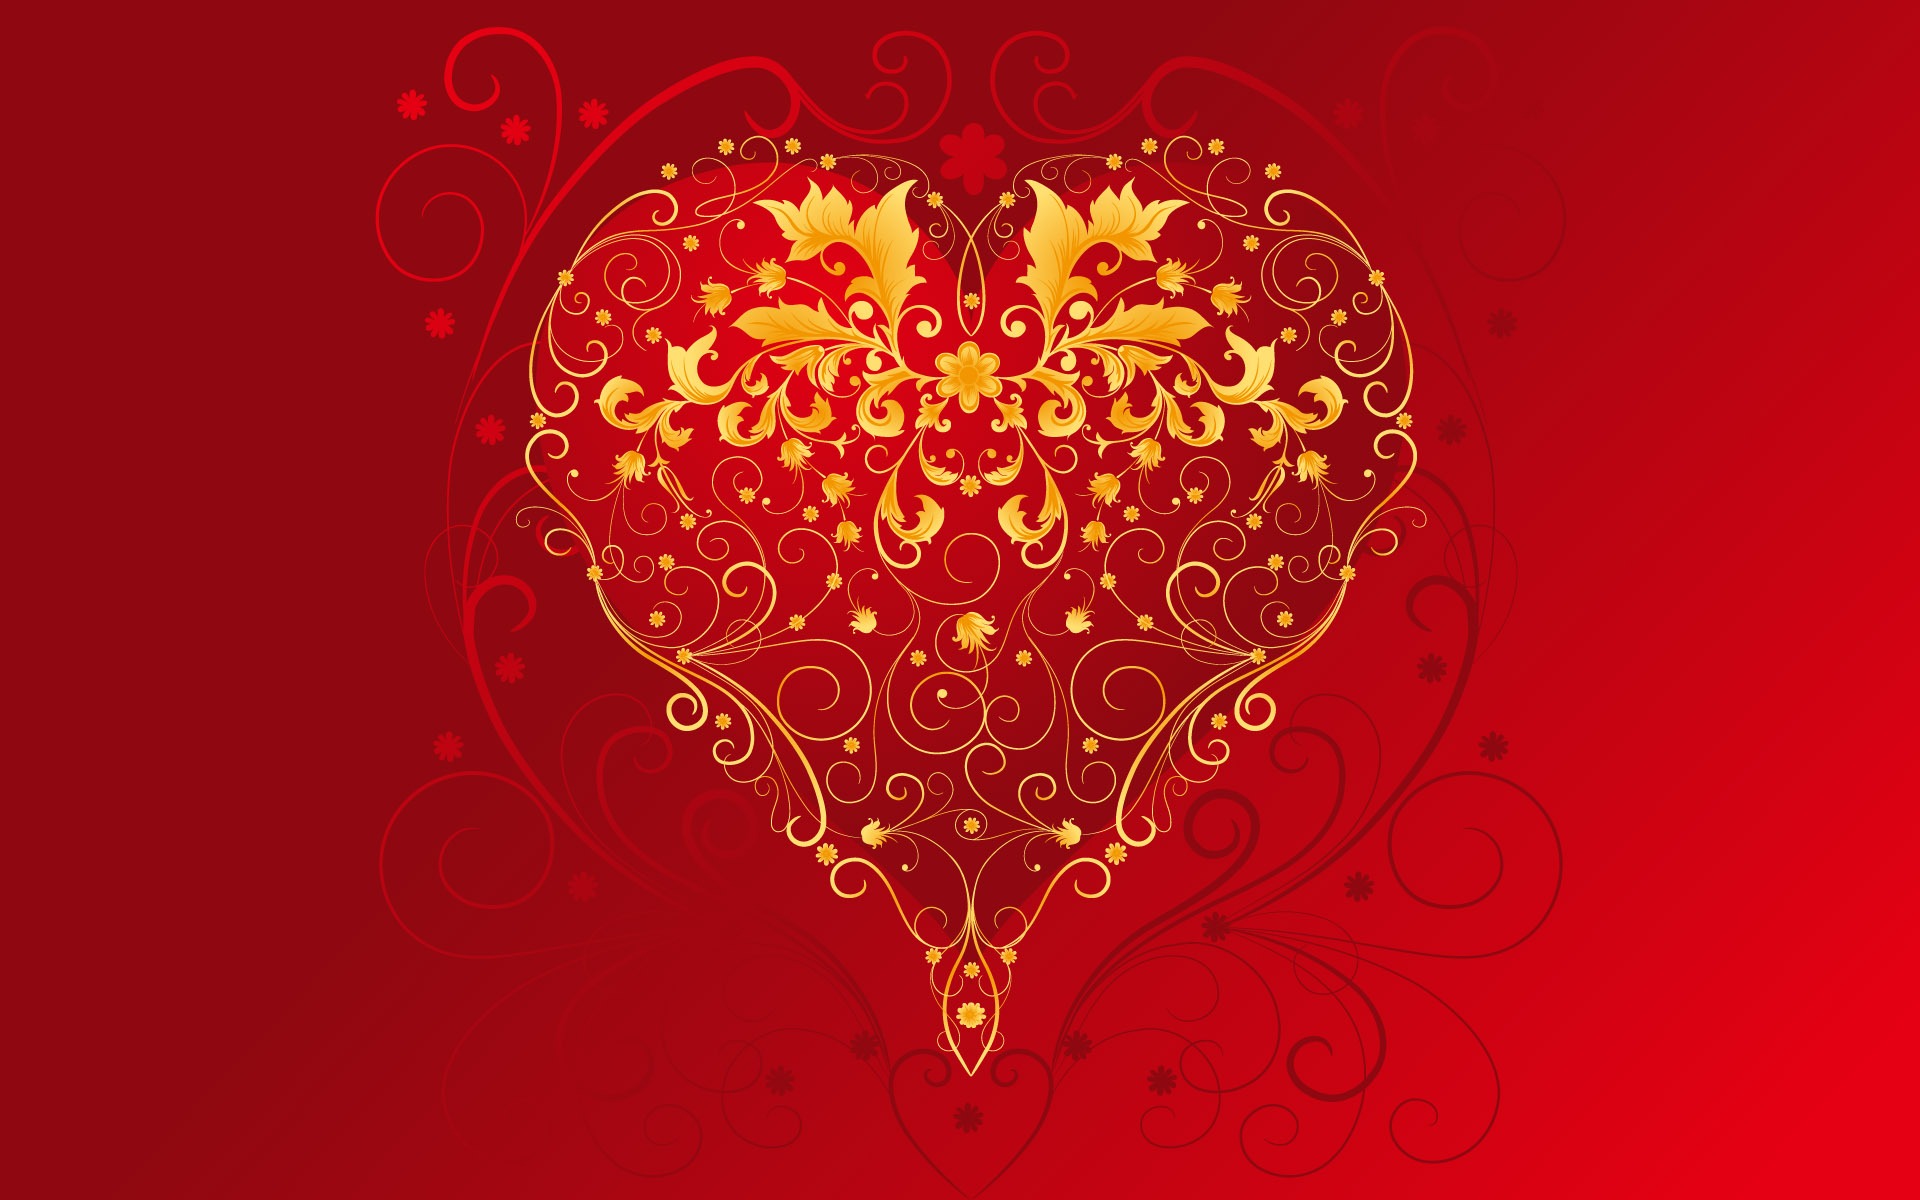 Valentine's Day Theme Wallpapers (6) #18 - 1920x1200